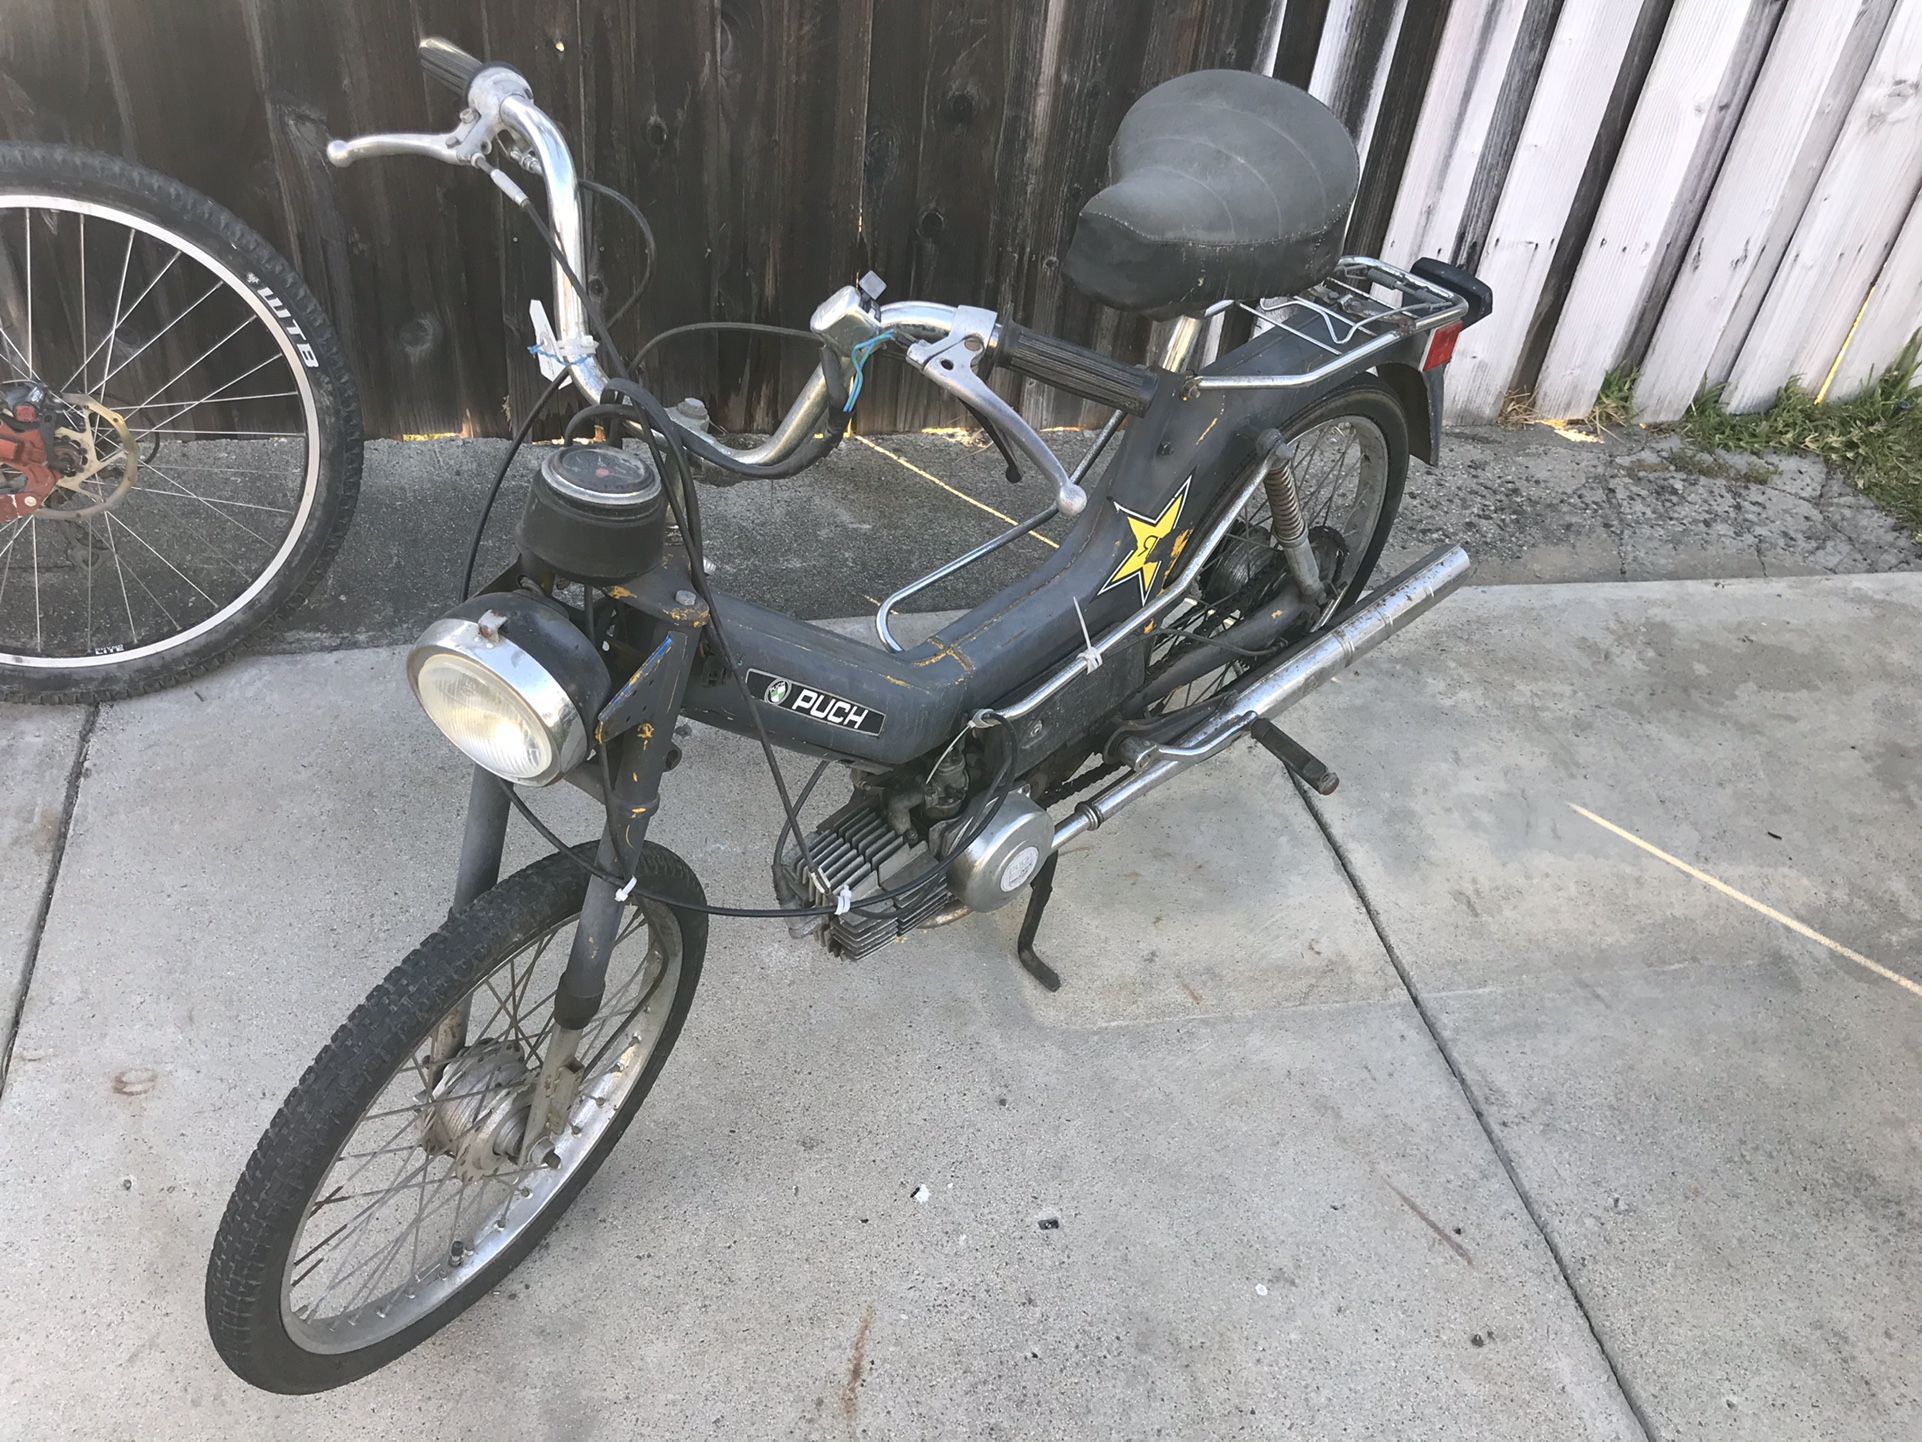 Moped By PUCH. Nice